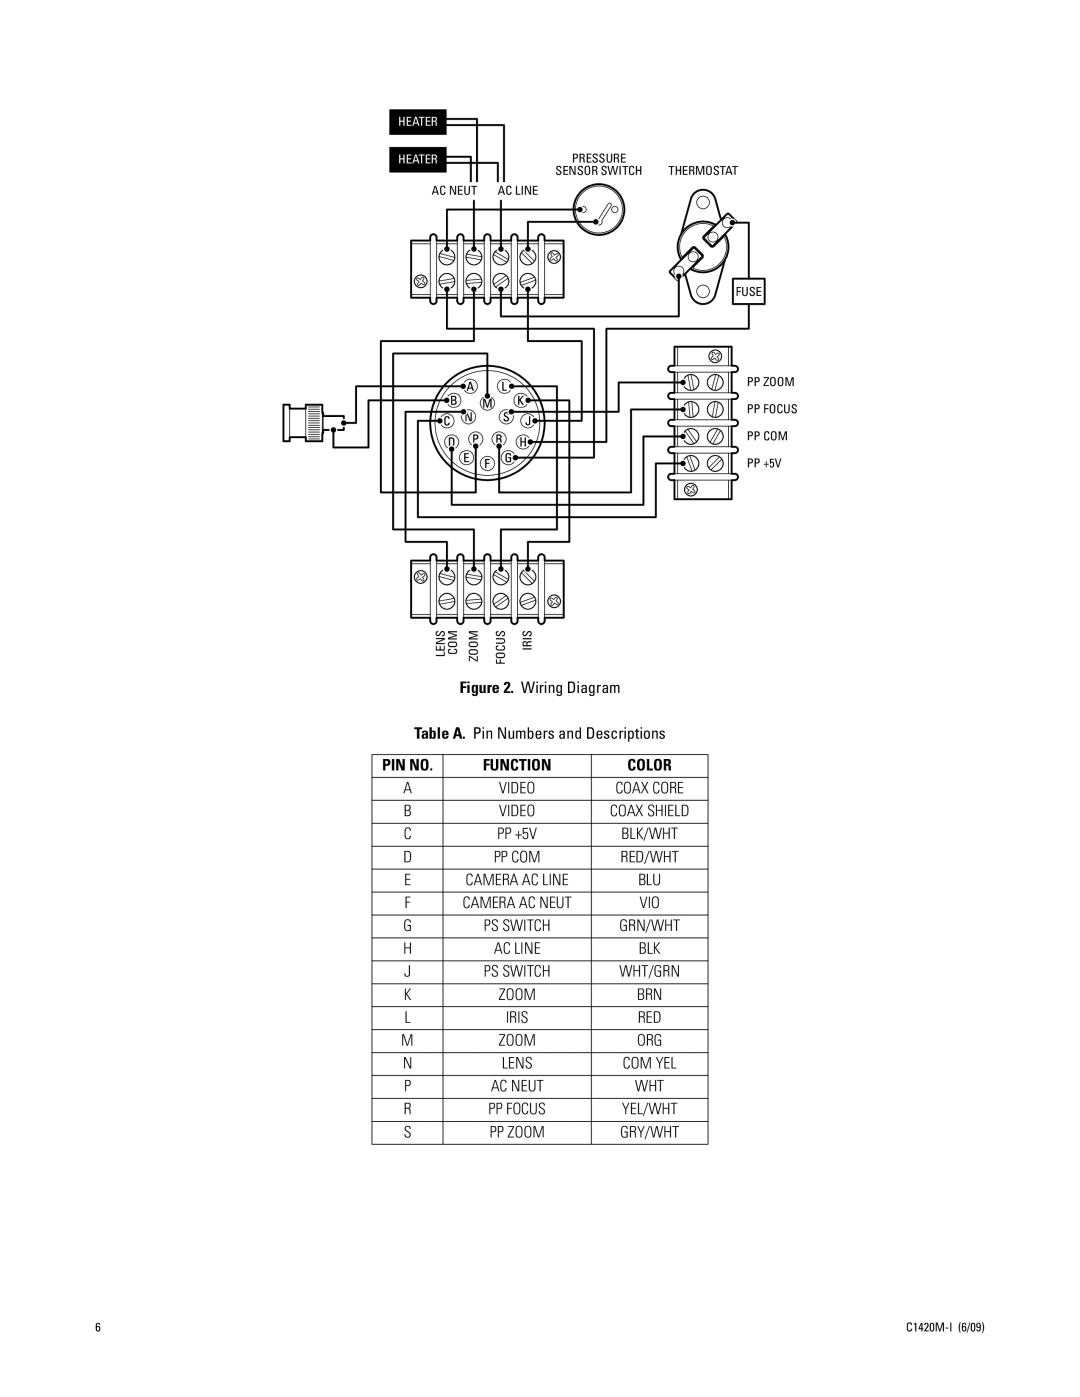 Pelco EH8106L Legacy manual Wiring Diagram, Table A. Pin Numbers and Descriptions, Pin No, Function, Heater Heater 